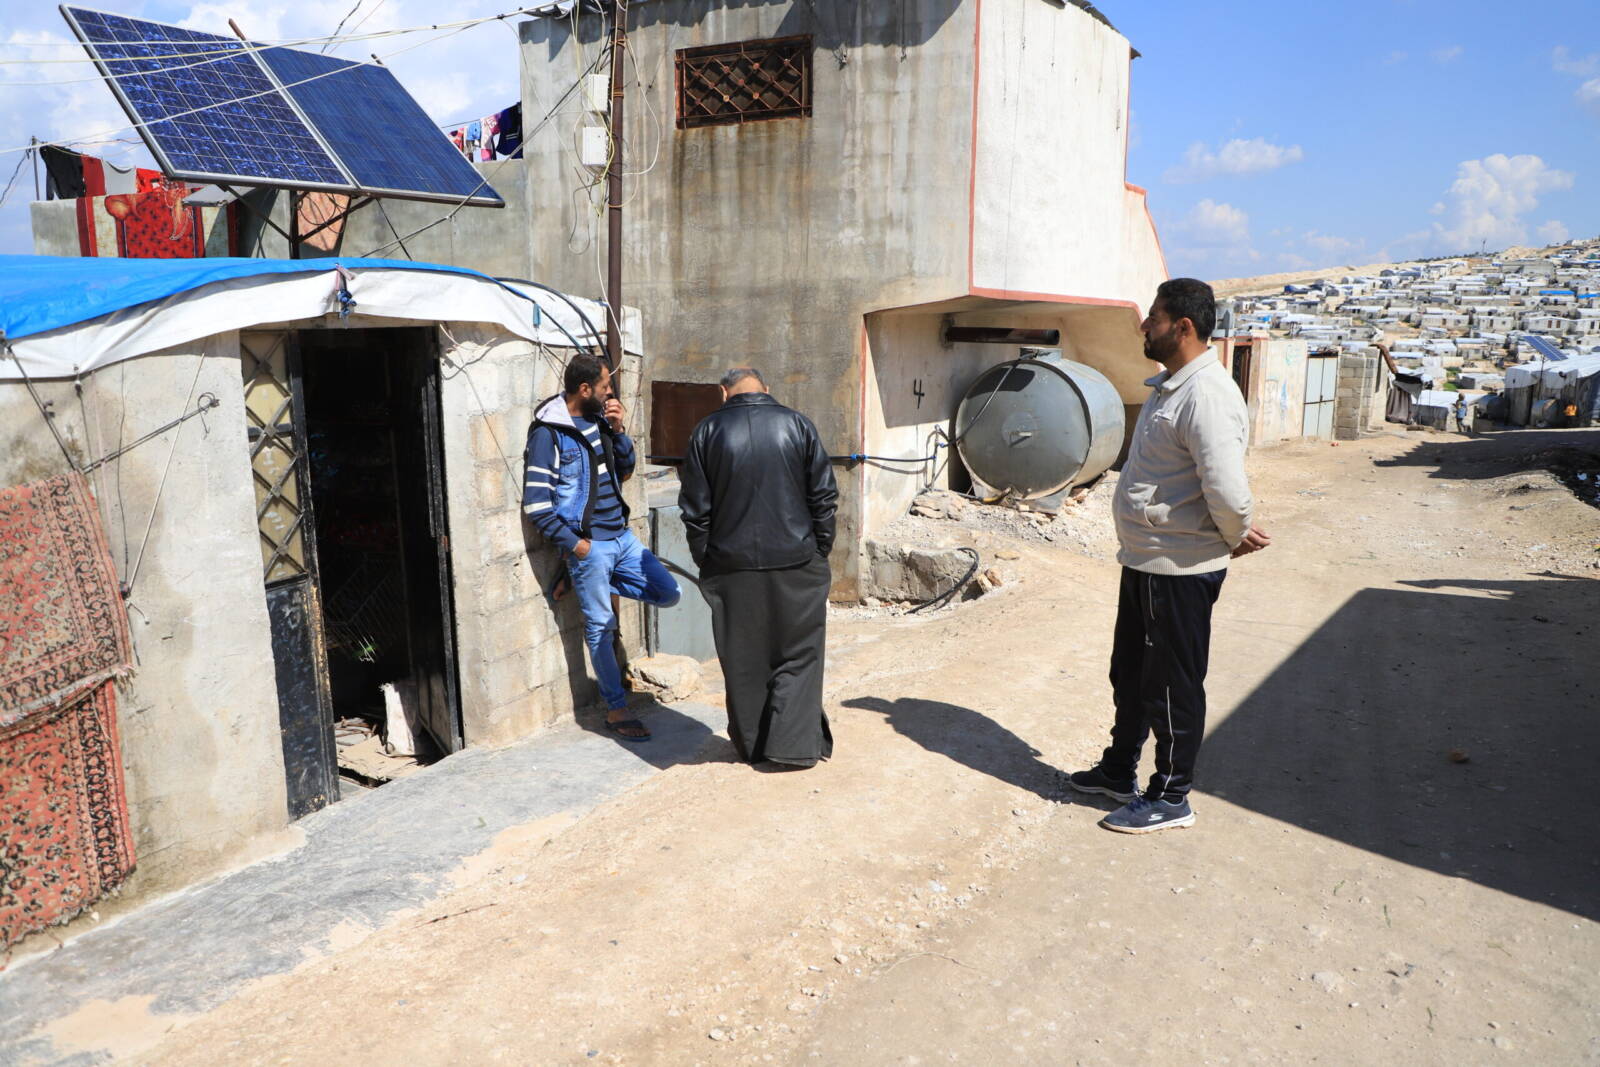 Mazen al-Wared, 40, stands with two of his neighbors in a neighborhood of Atma’s Umm al-Shuhada camp, 10/3/2024 (Abd Almajed Alkarh/Syria Direct)